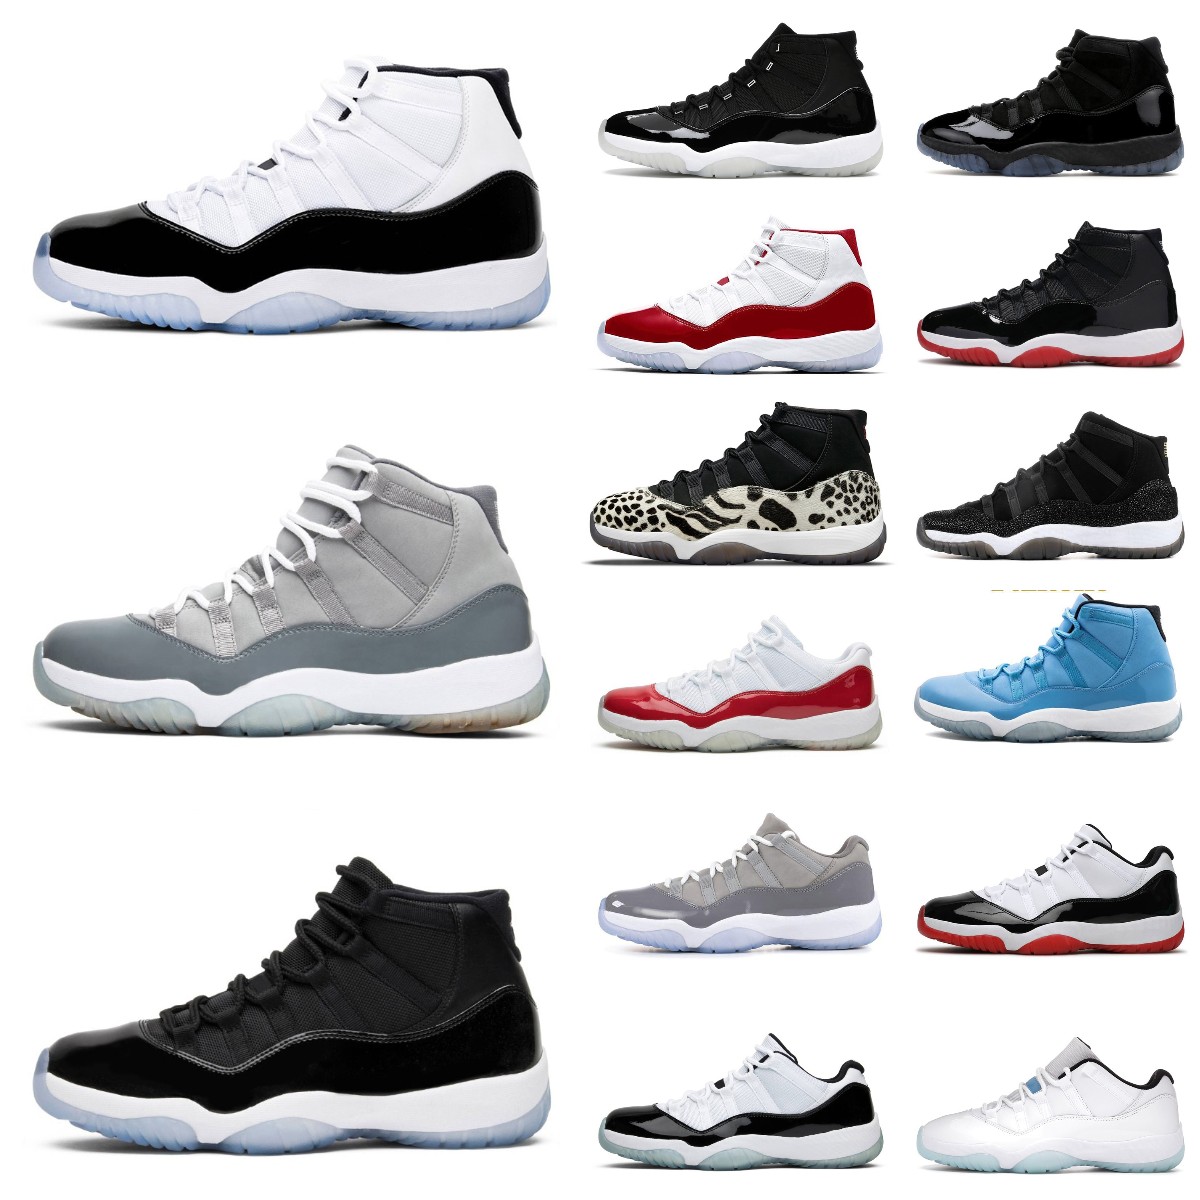 2023 New Mens Jumpman 11 Chaussures de basket-ball Cool Grey 11s Sneakers Concord Space Jam Jubilee Cherry Legend Blue Bred Pure Violet Unc Sports Women Trainers 36-47